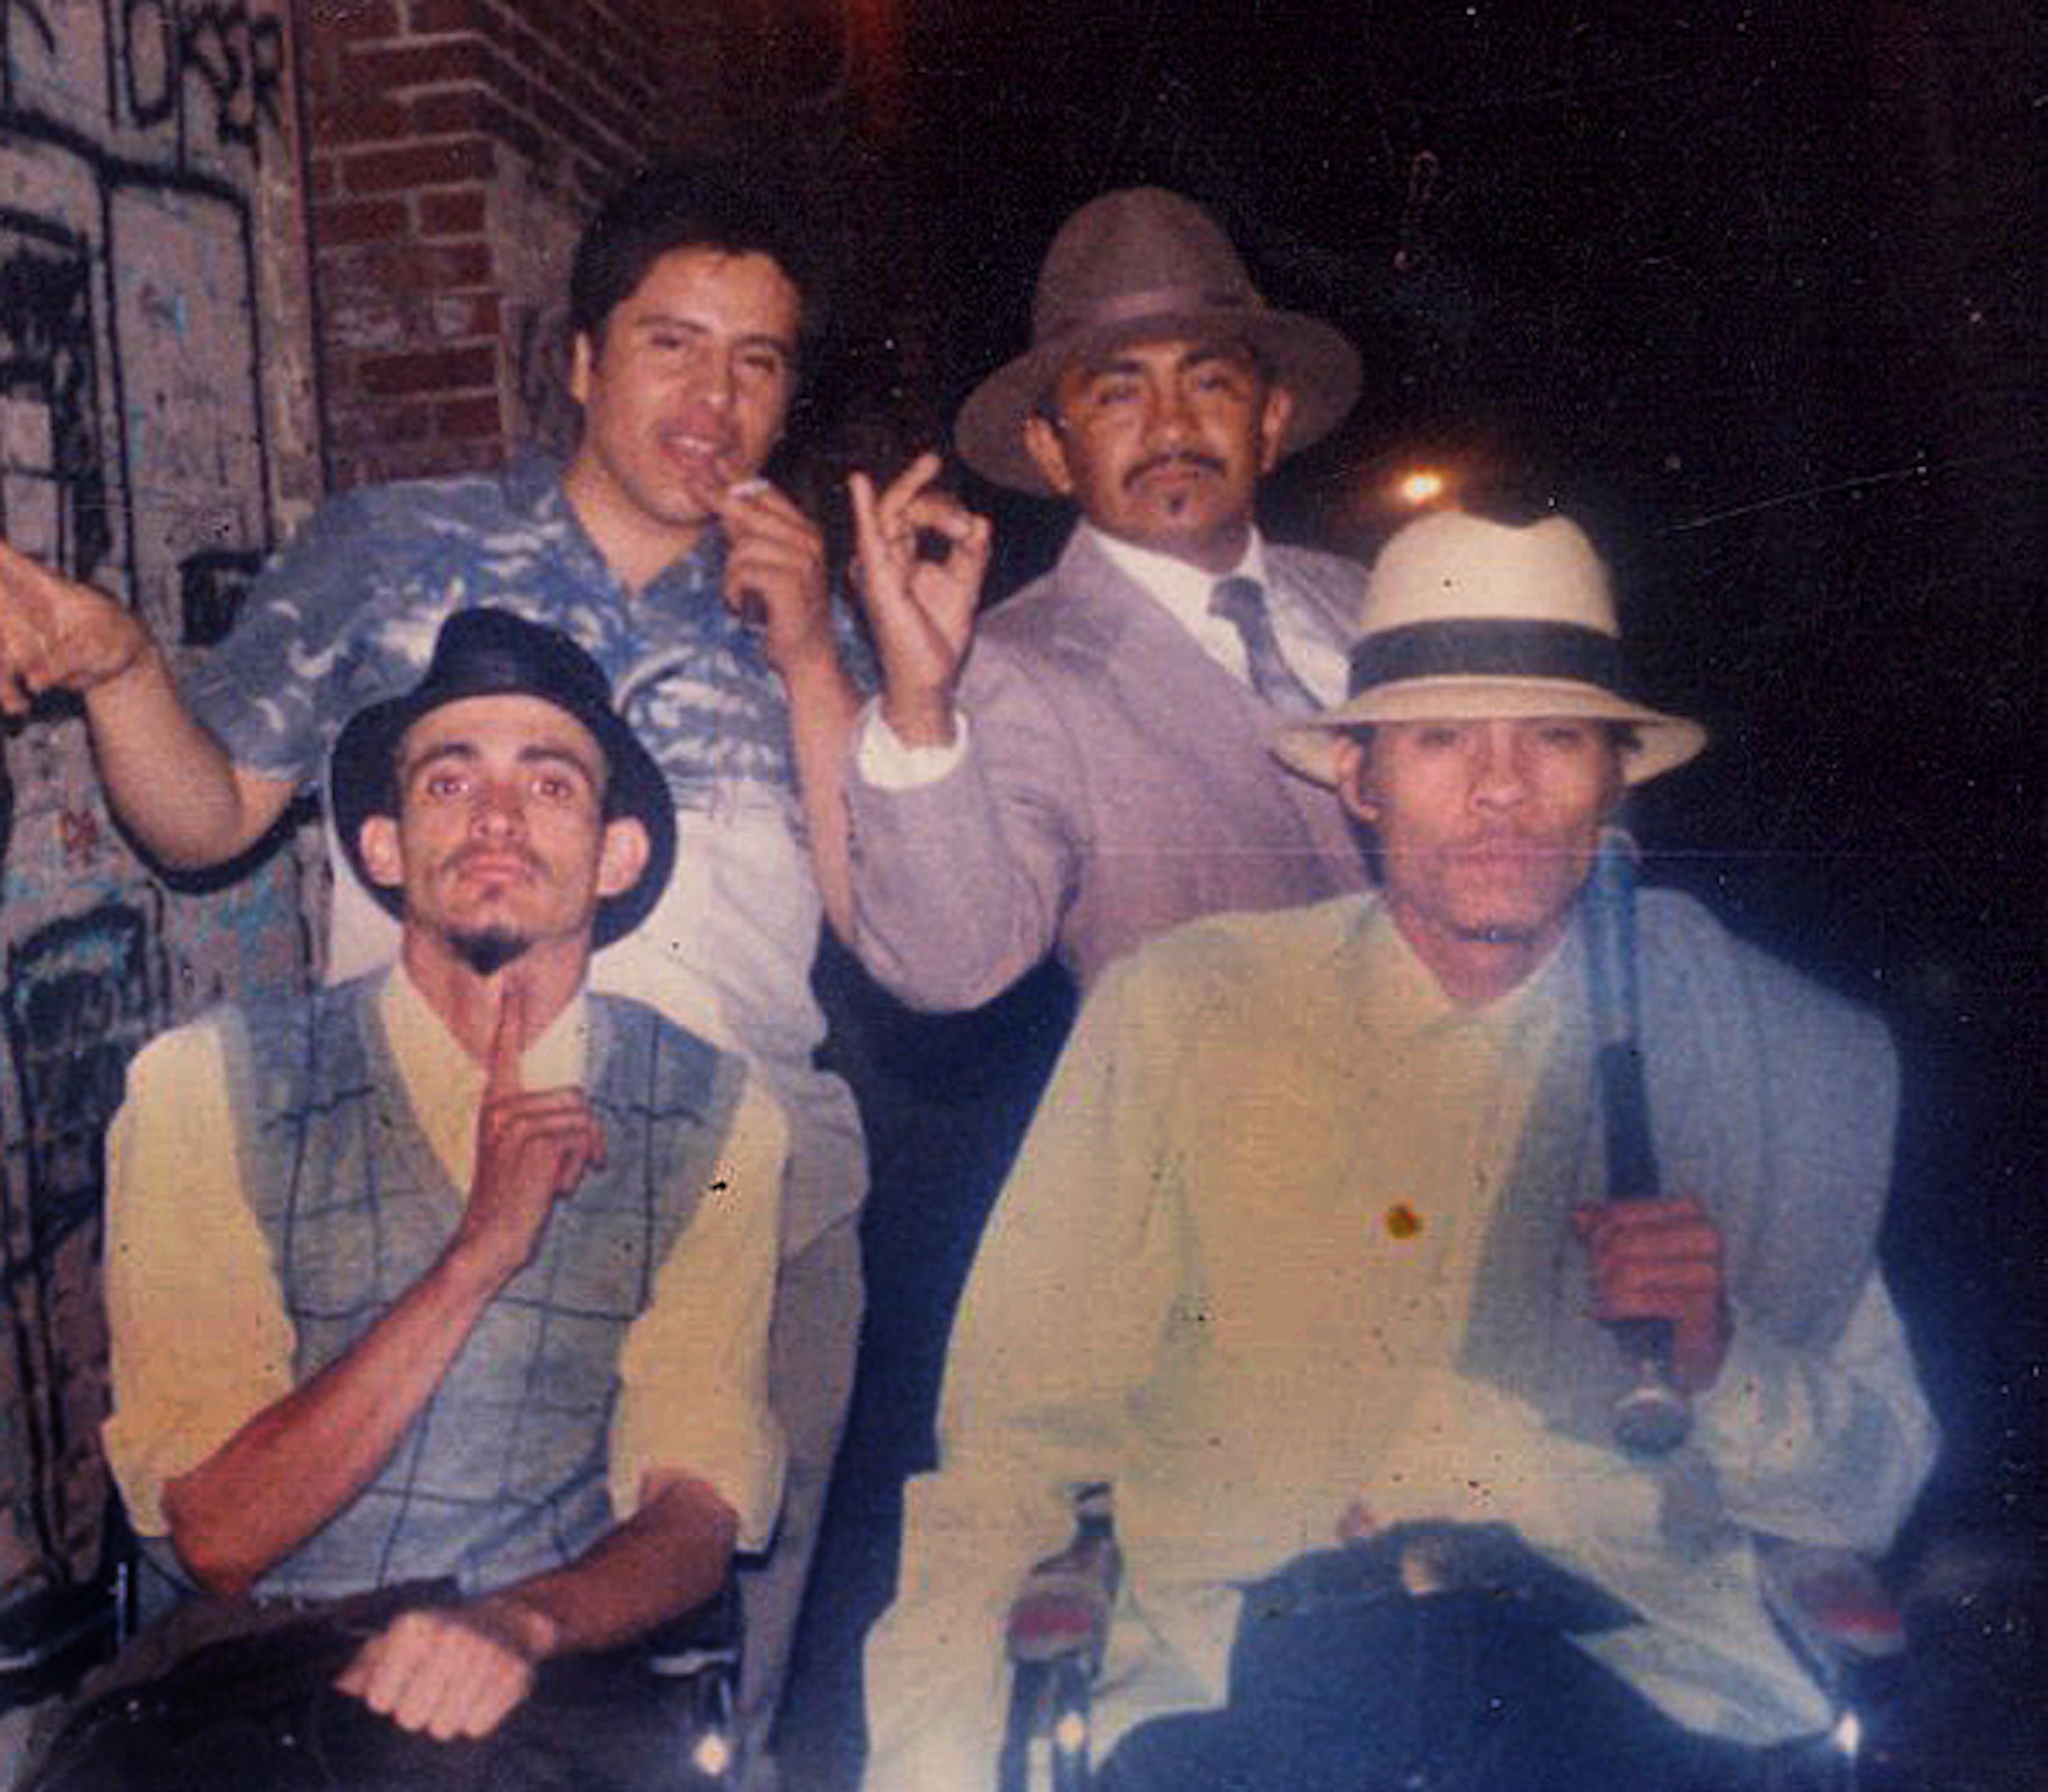 Members of Los Angeles Playboys gang. In the eighties, the oldest southern gangs sported “pachuco” style at parties. On the bottom right is El Flaco, an elder palabrero of the Normandie Locos clique.